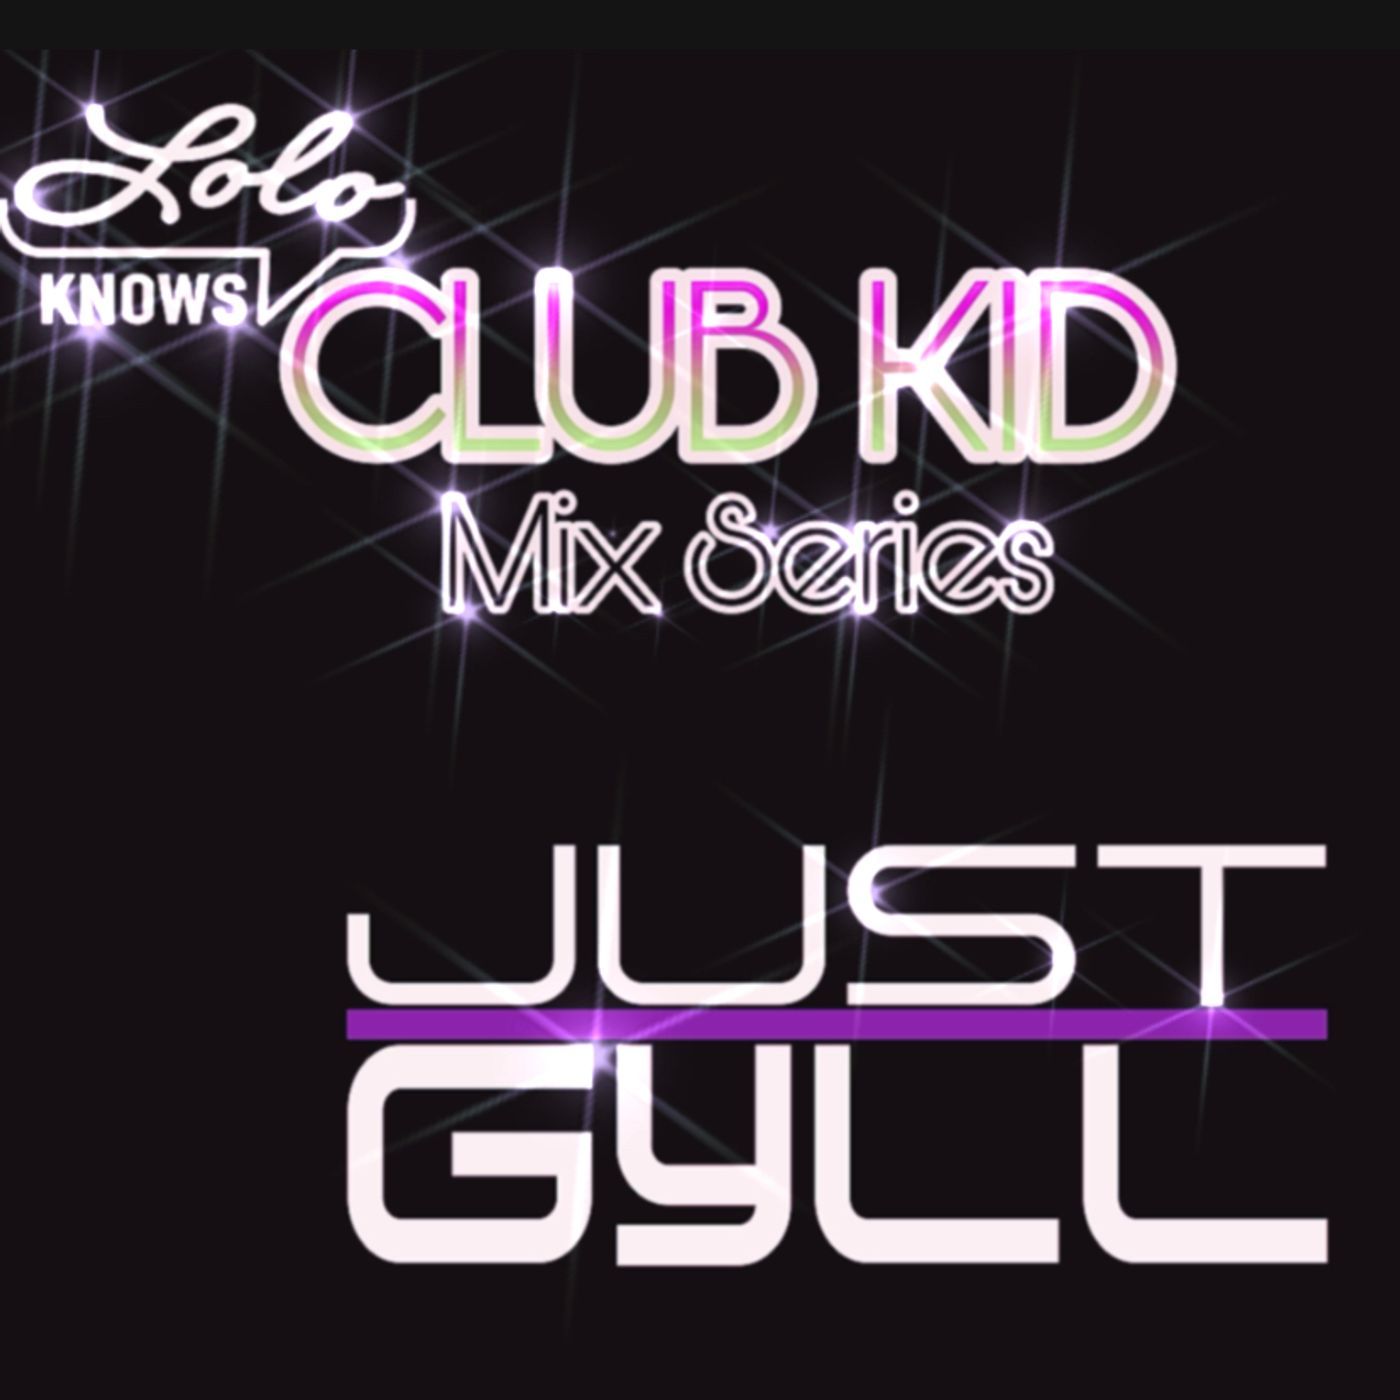 LOLO Knows Club Kid Mix Series... Just Gyll, Transitions United, South Carolina